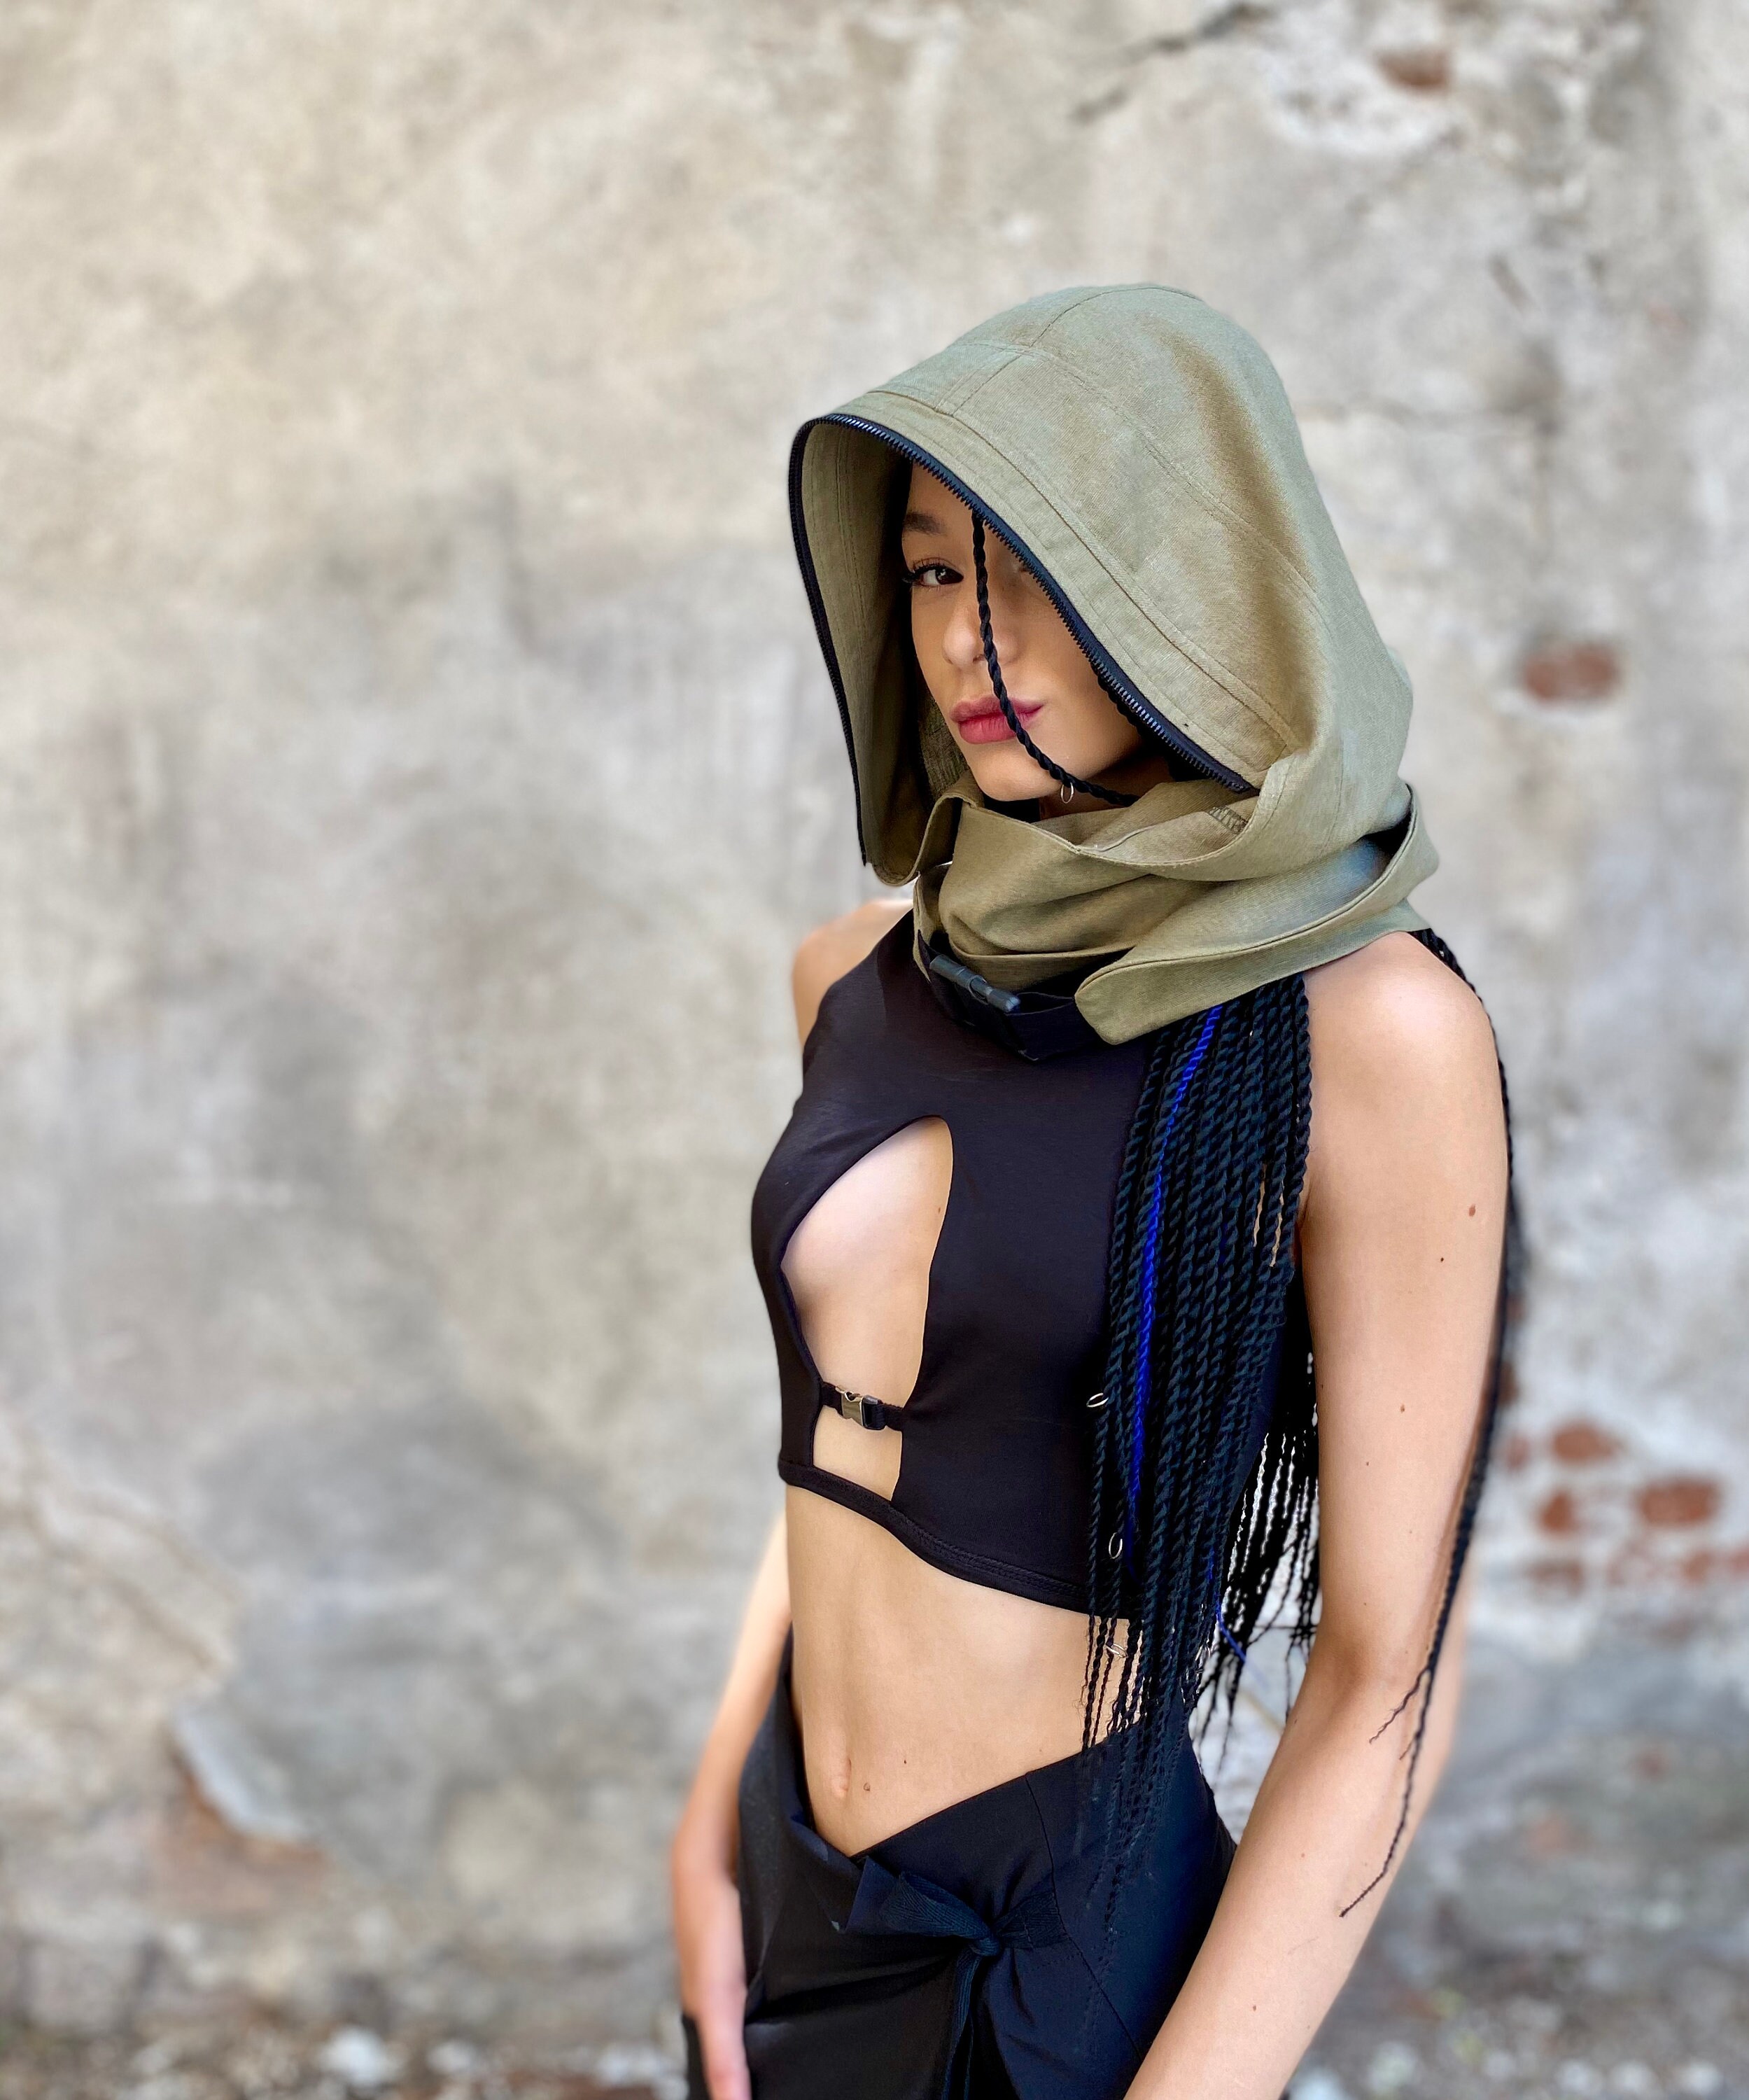 Hooded Infinity Scarf – Do It Better Yourself Club